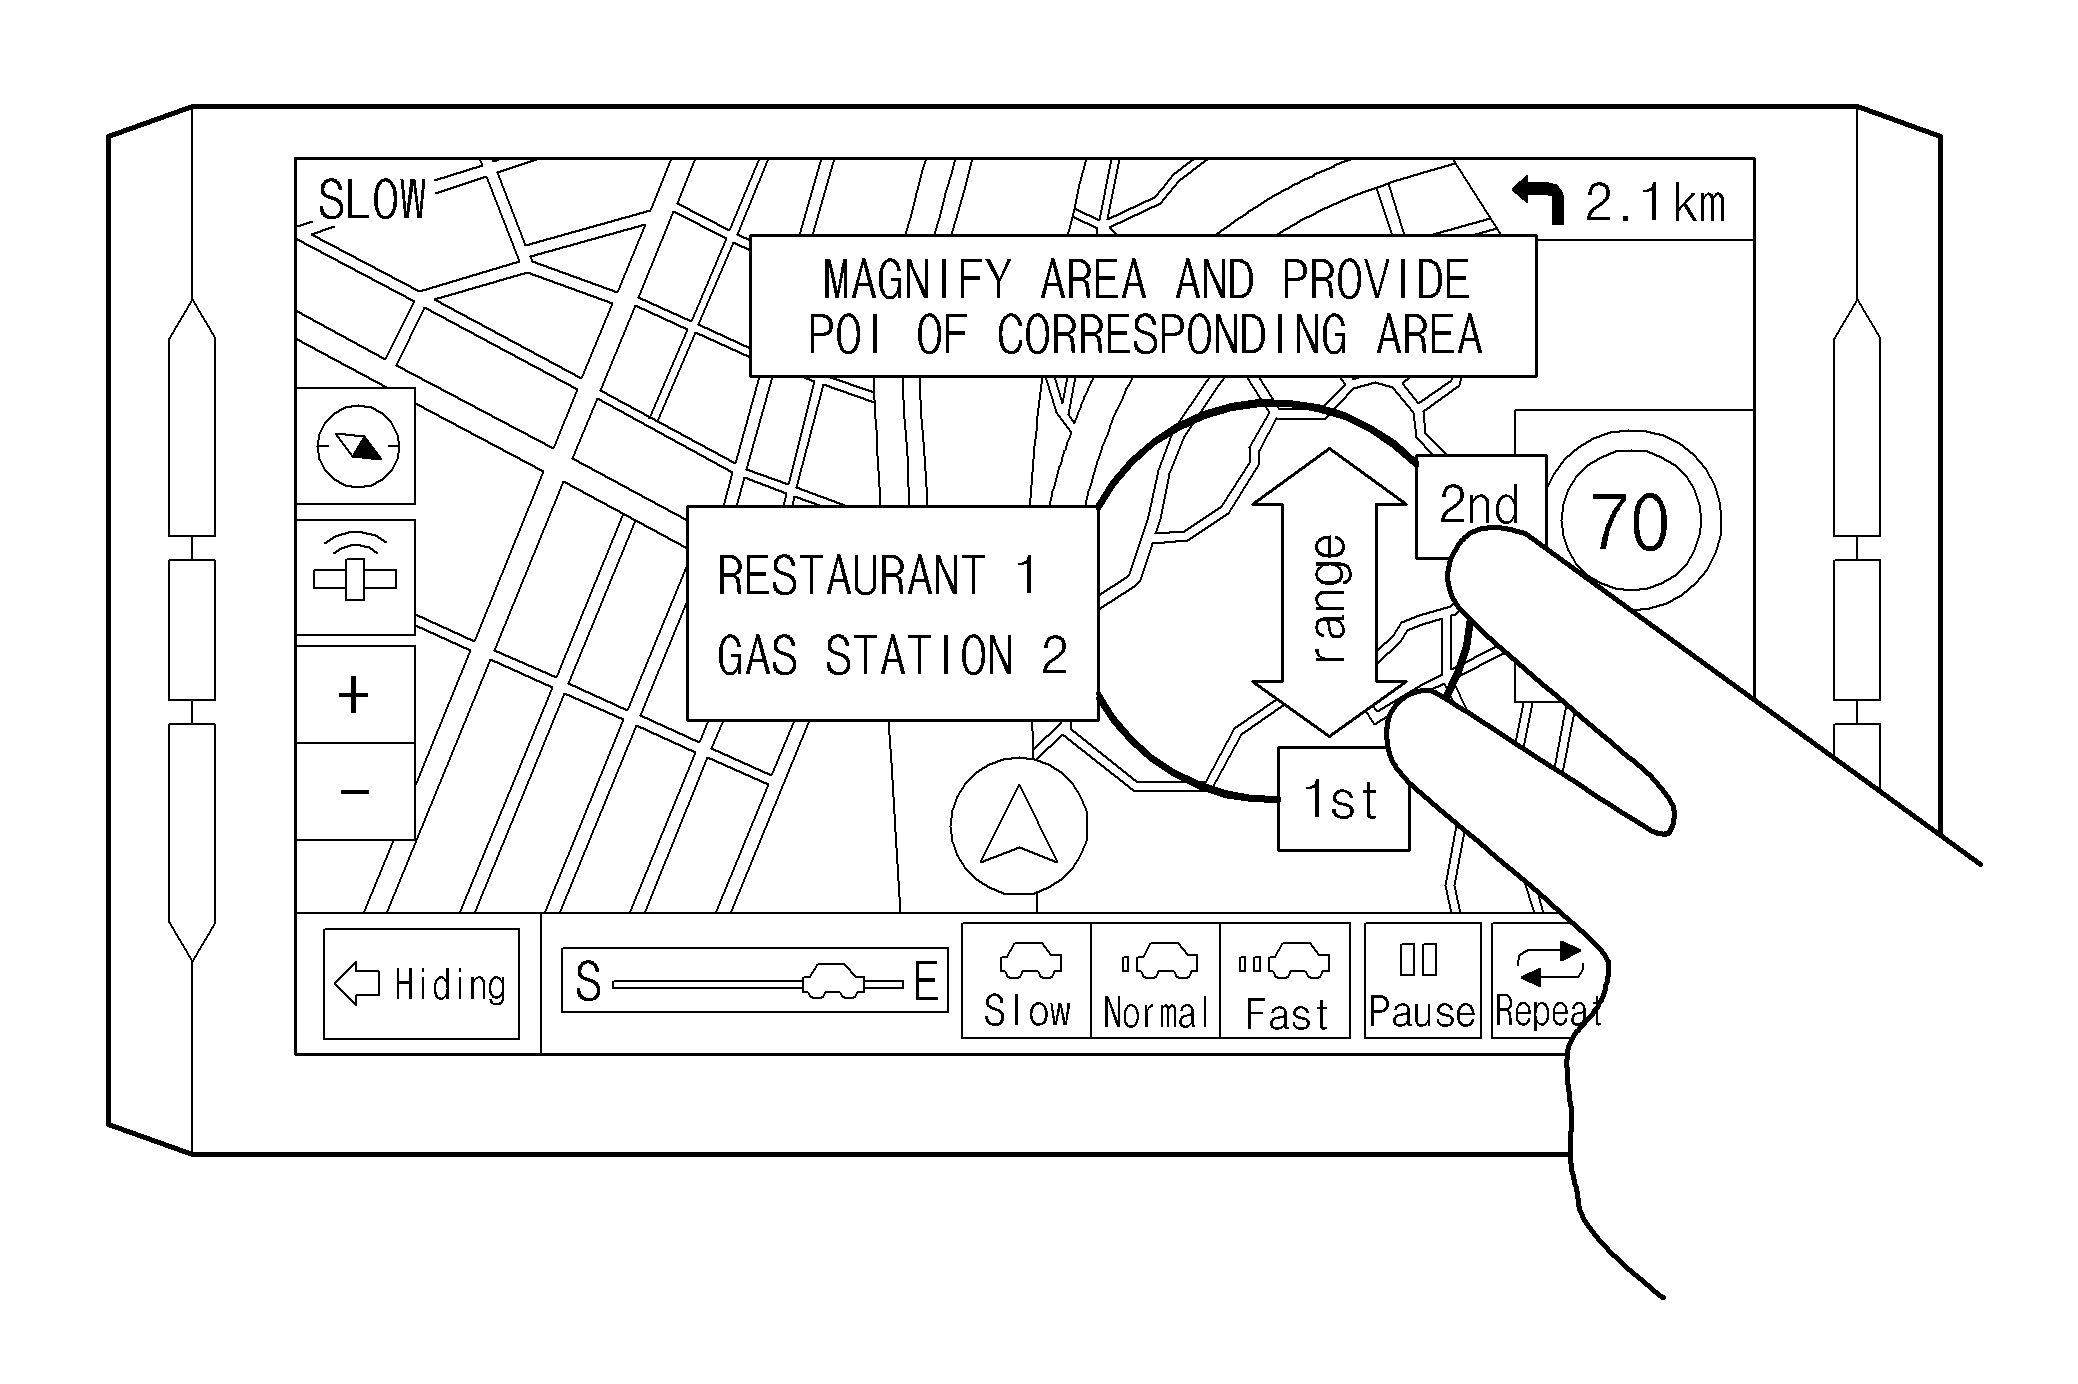 Method and apparatus for controlling detailed information display for selected area using dynamic touch interaction